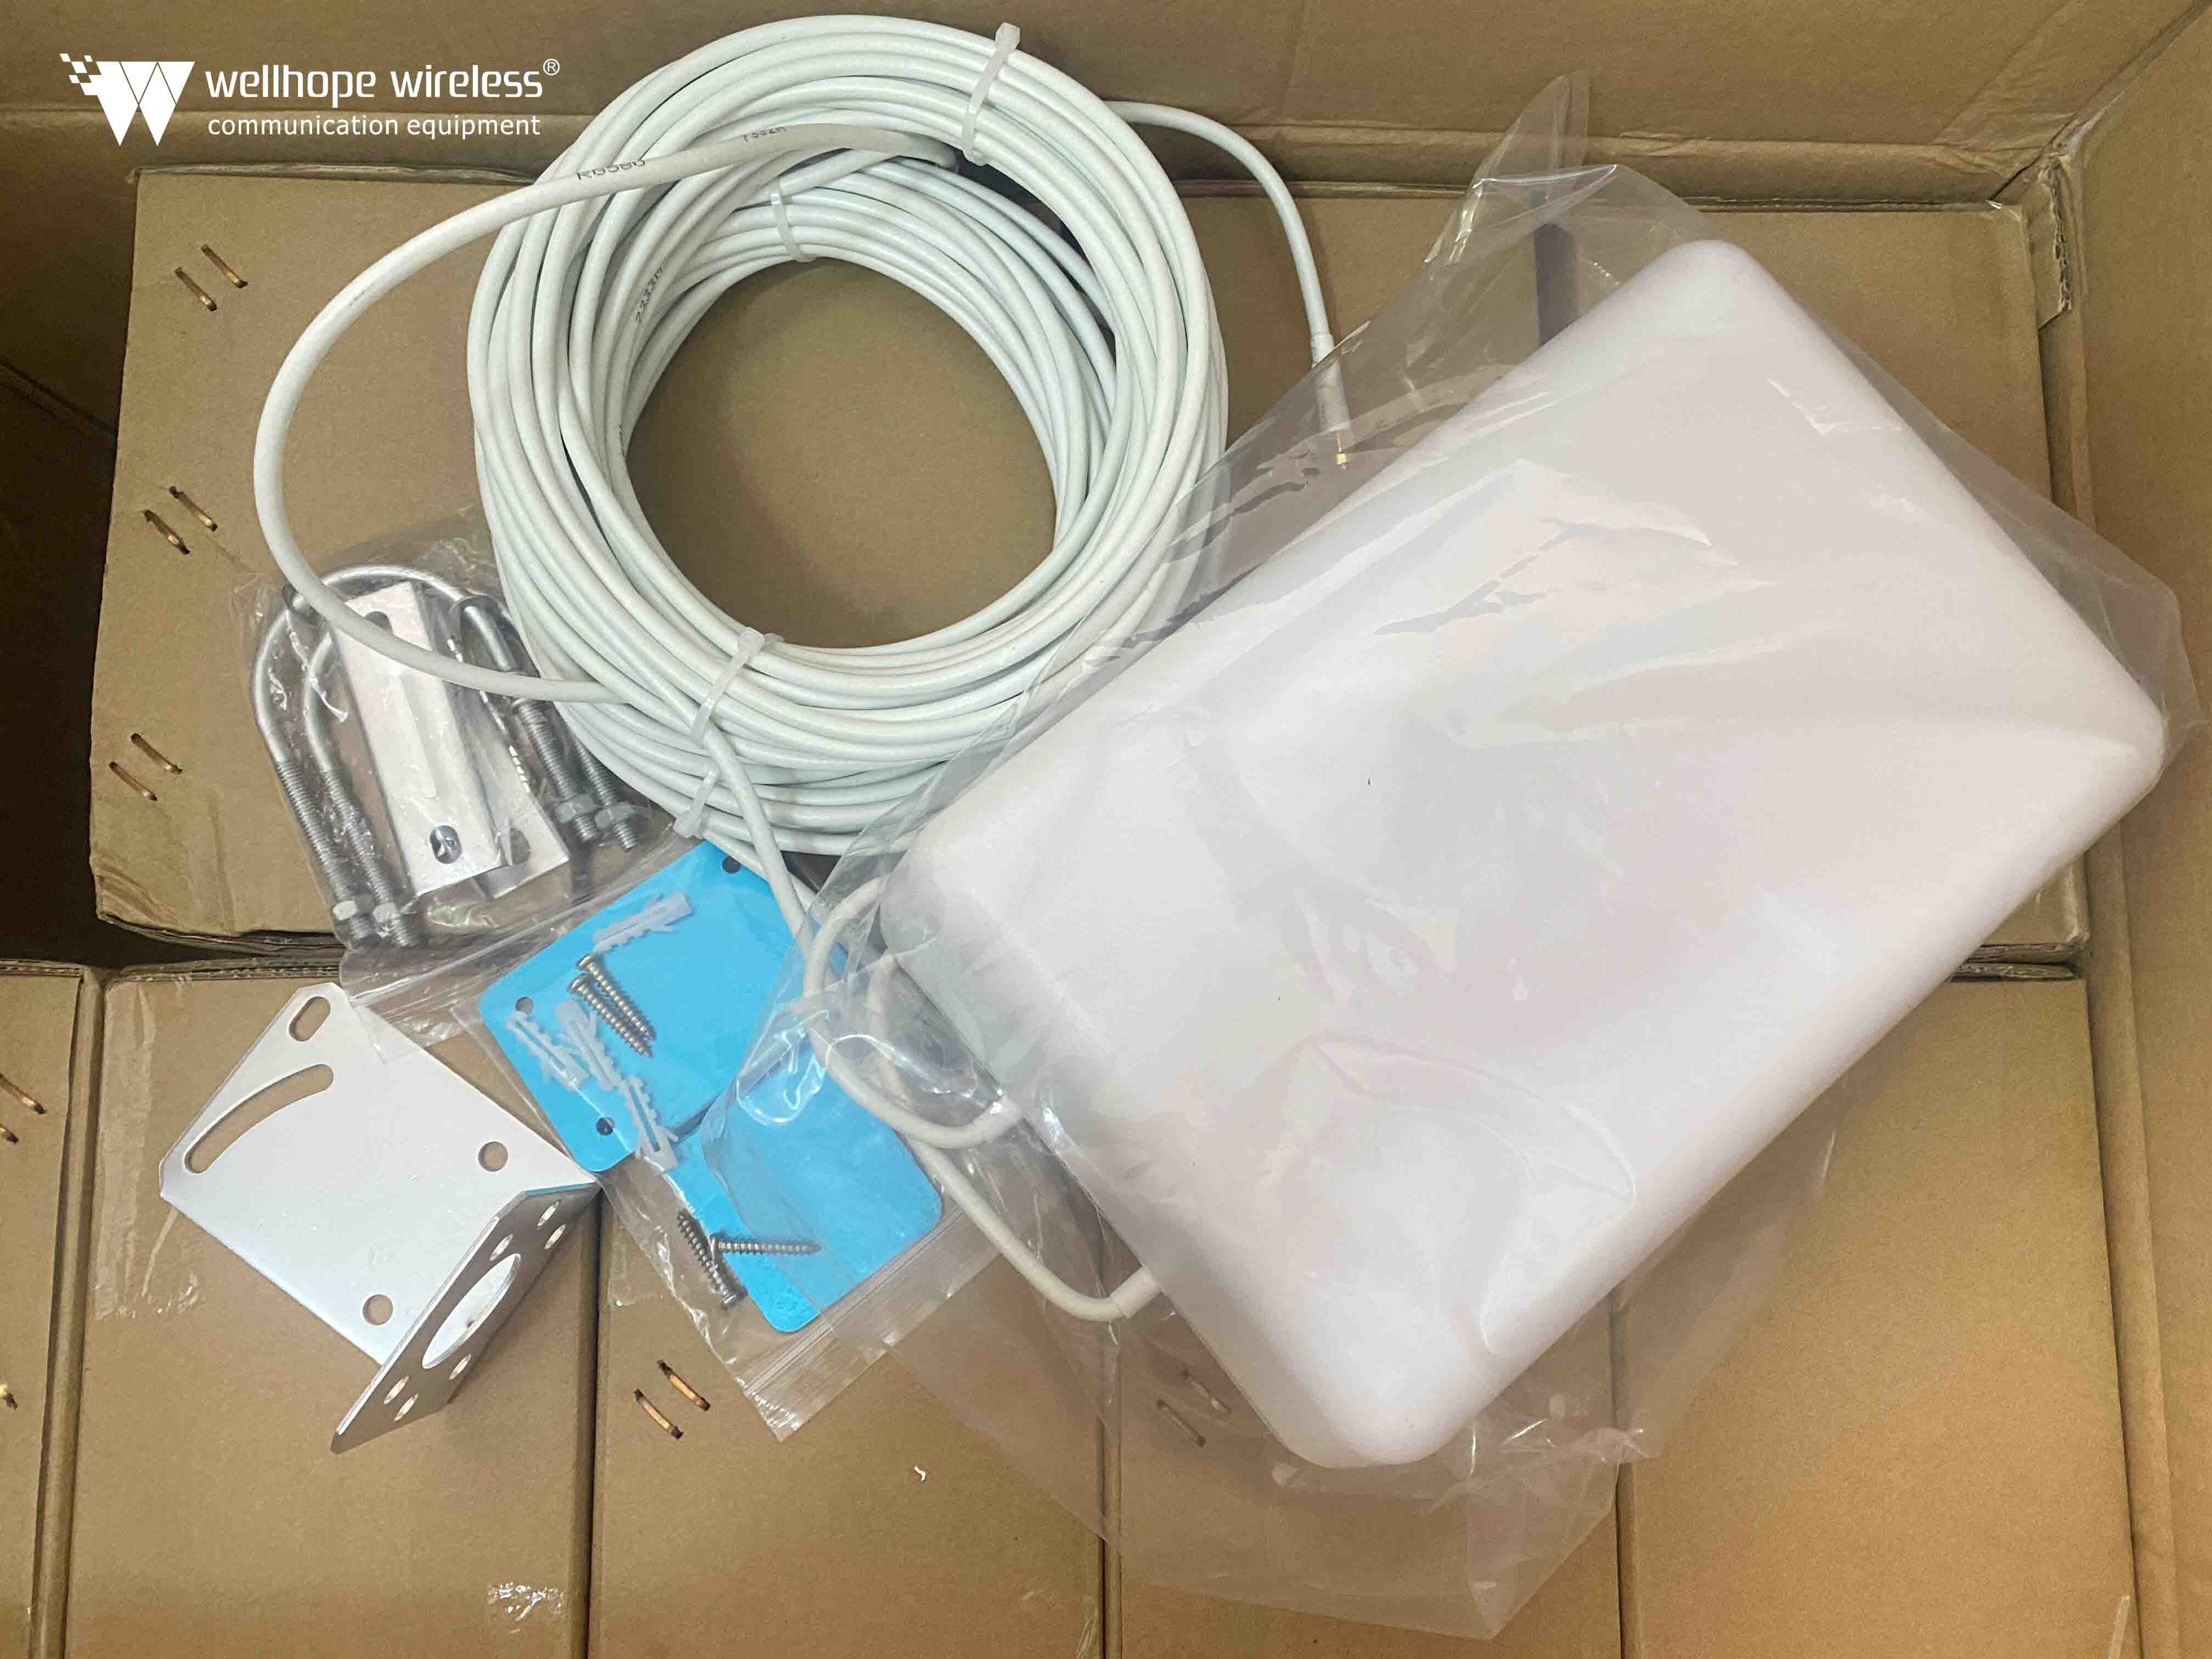 2022-10-19 WH-5G-WiFi9X2 200pcs 5G 4G indoor and outdoor patch antenna ready to ship